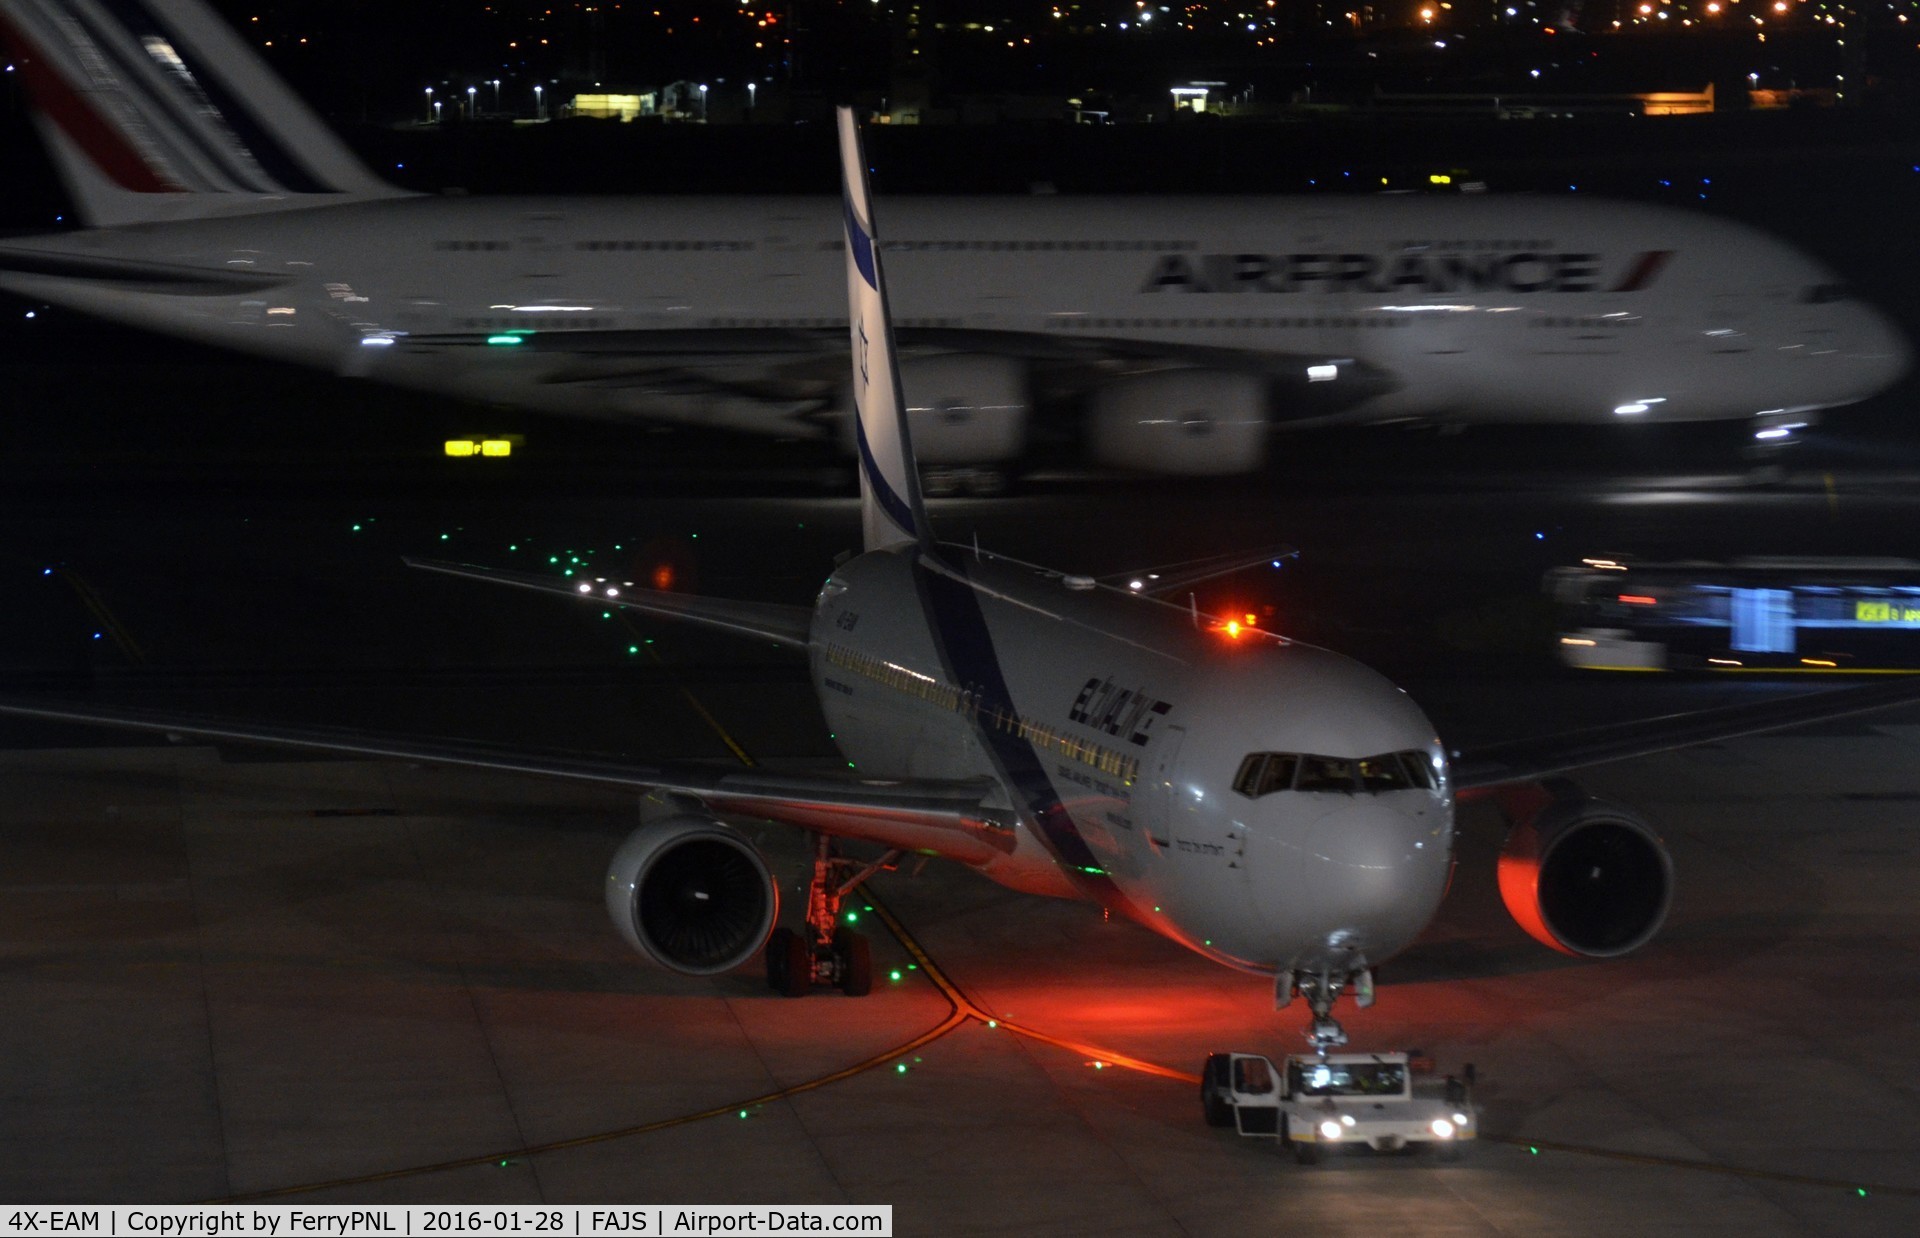 4X-EAM, 1998 Boeing 767-3Q8/ER C/N 28132, ELAL B763 being pulled to its gate in preparation for is flight to Tel Aviv.